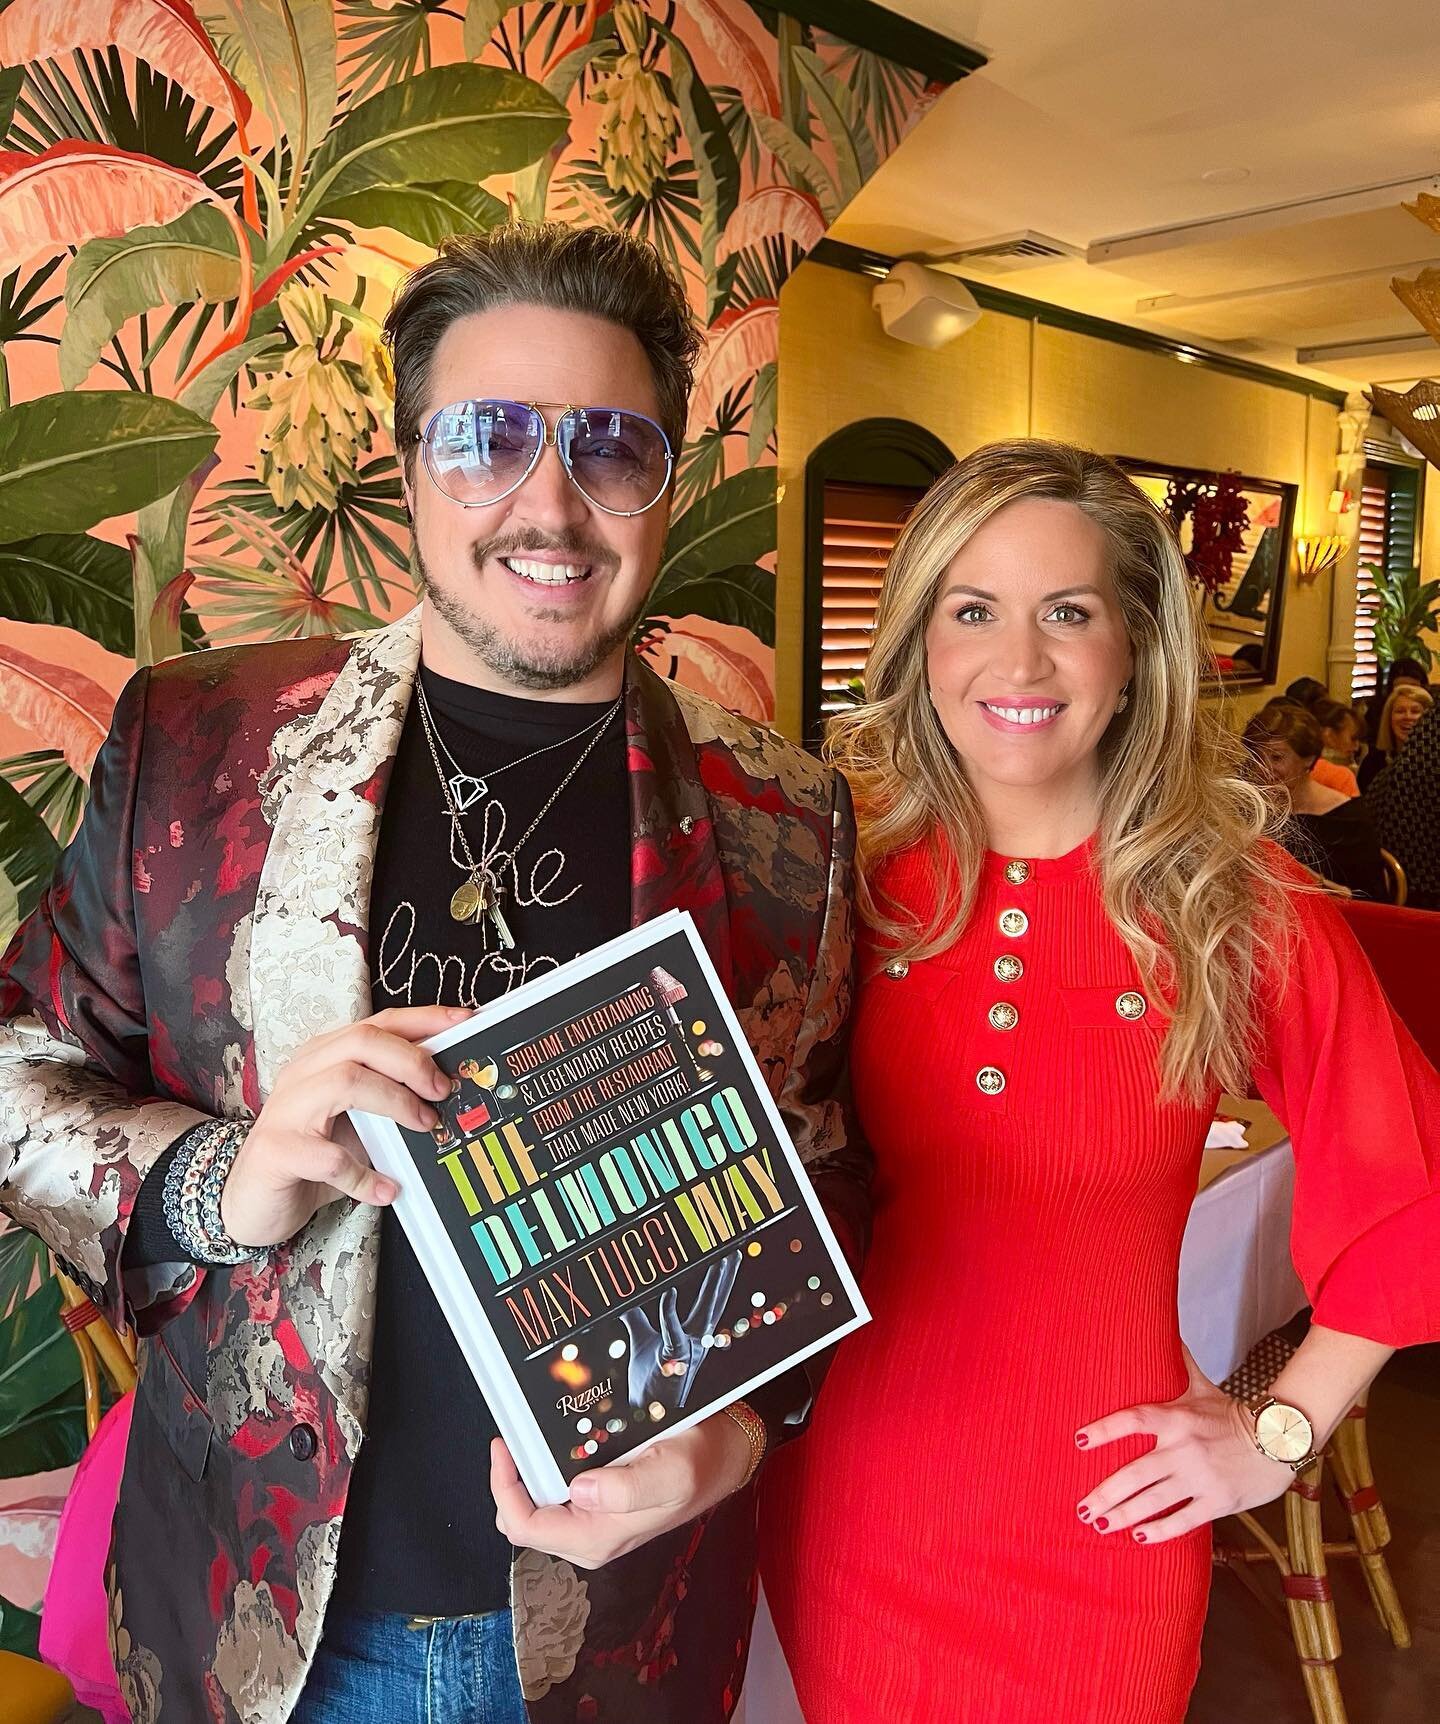 📣Partners in Crime 📣 I loved every second of moderating @maxtucci&rsquo;s Author Talk today and celebrating NYC&rsquo;s glitz and glamour &mdash;The Delmonico Way! 🍸 #cantstopwontstop 
.
.
.
.
.
.
.
.
.
.
.
.
#authortalk #motivationalspeaker #beyo